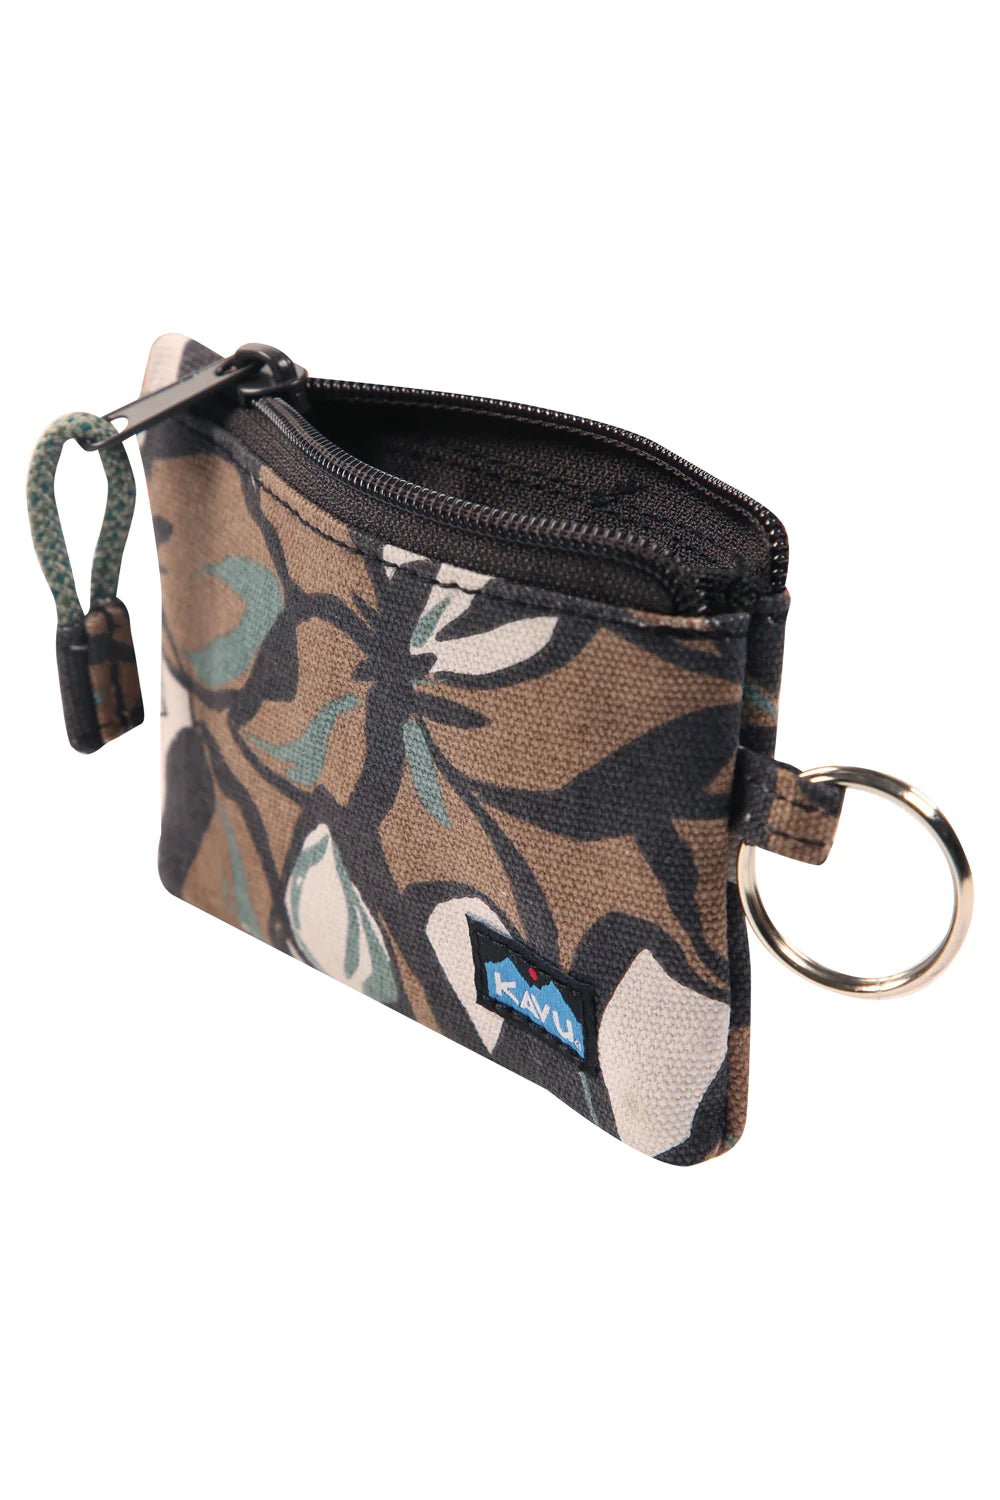 Boone Mountain Sports - STIRLING WALLET